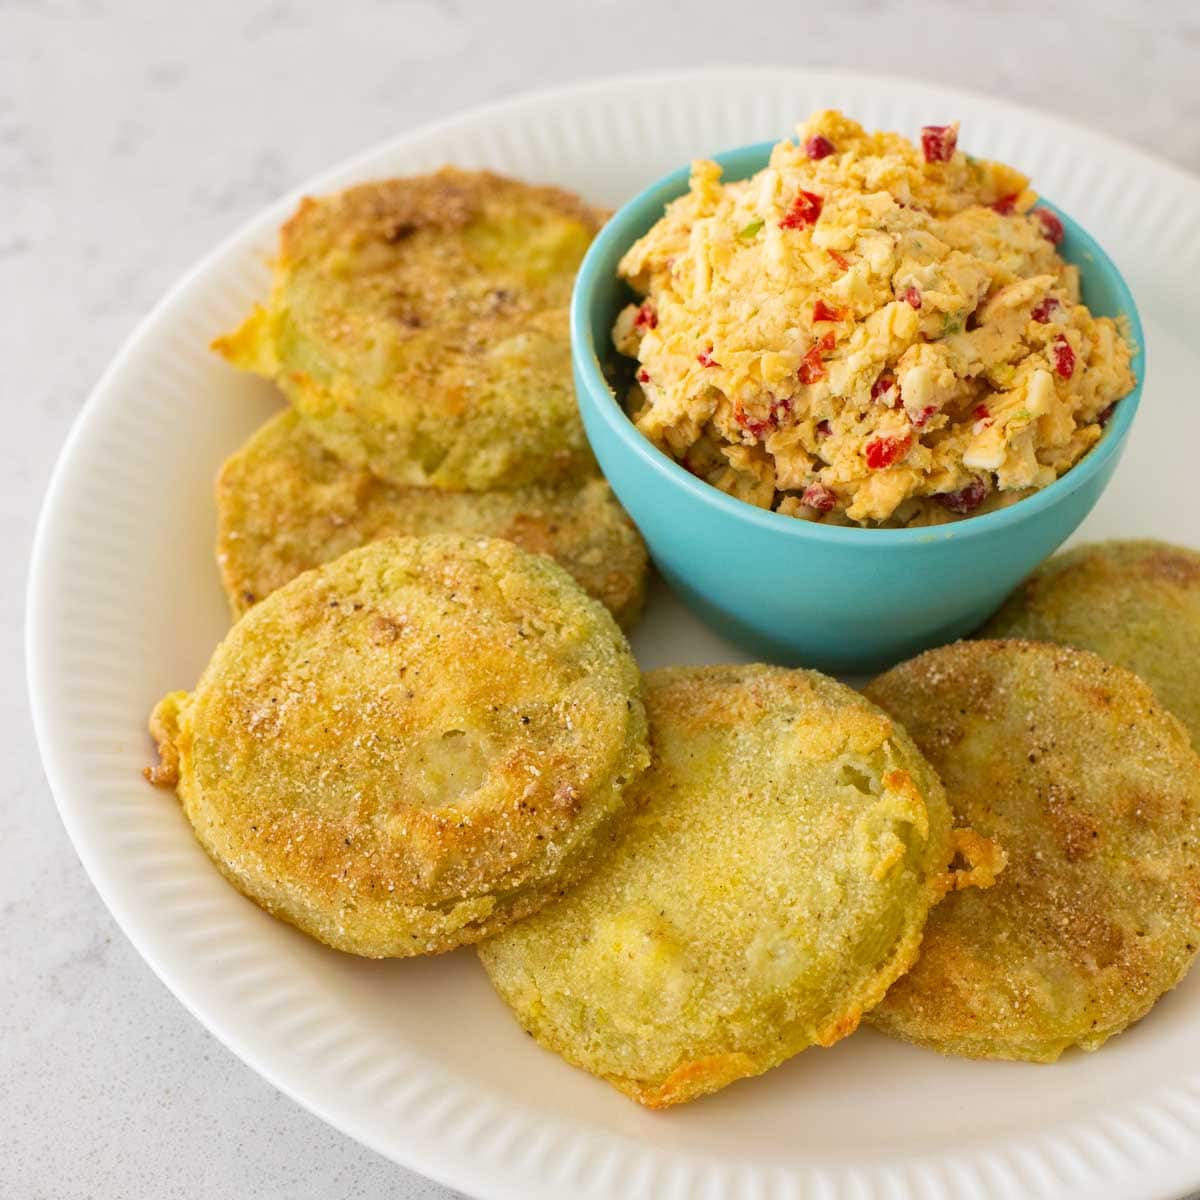 Southern fried green tomatoes